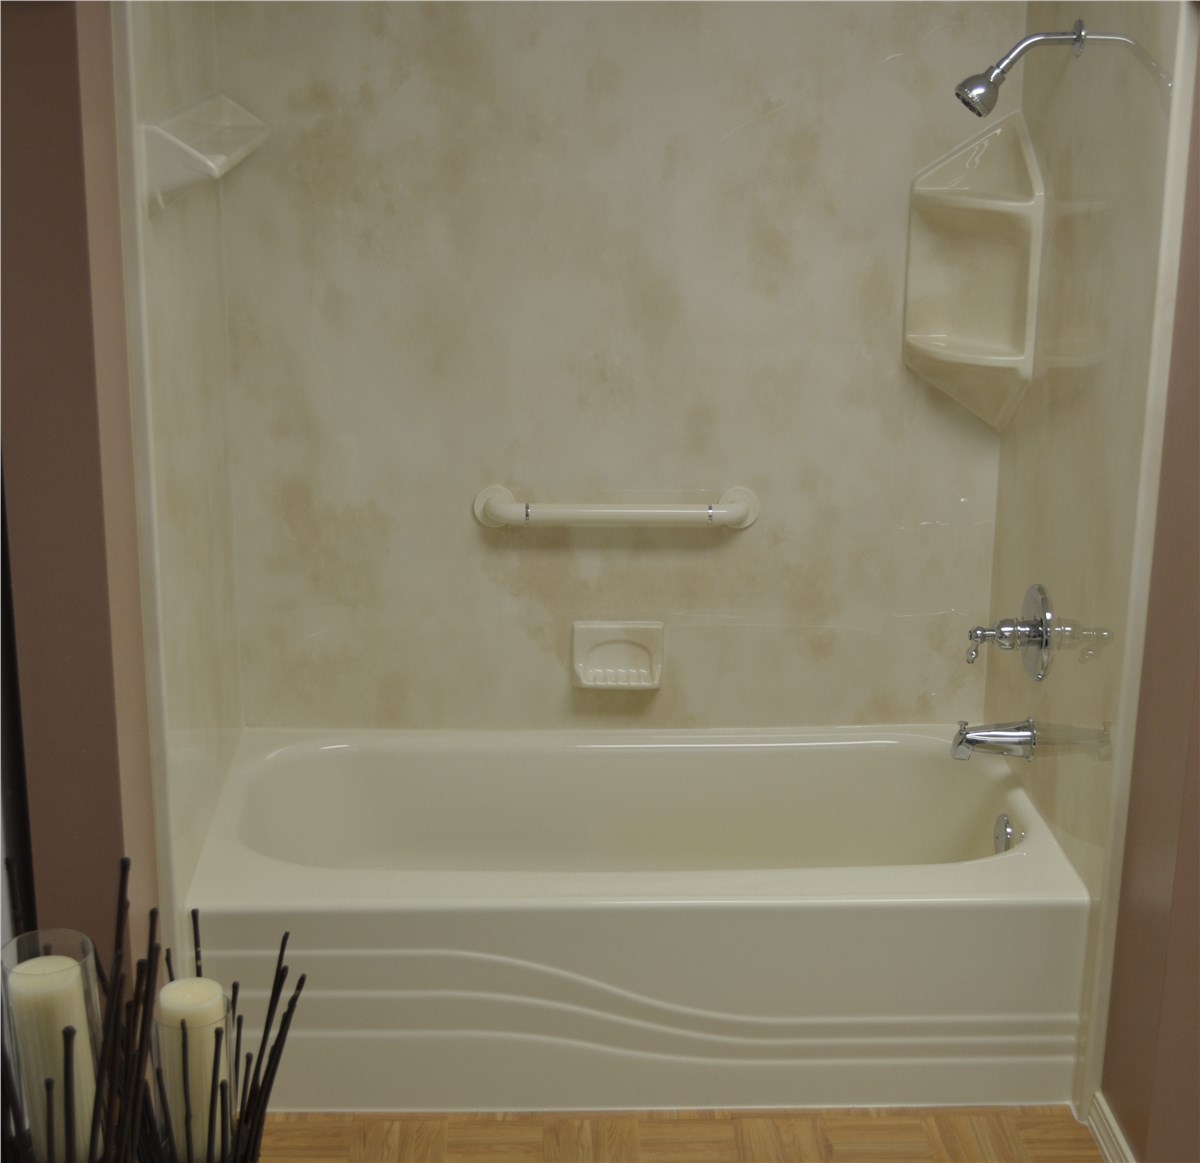 Shower to Tub Conversion North Texas | Replace Shower with ...